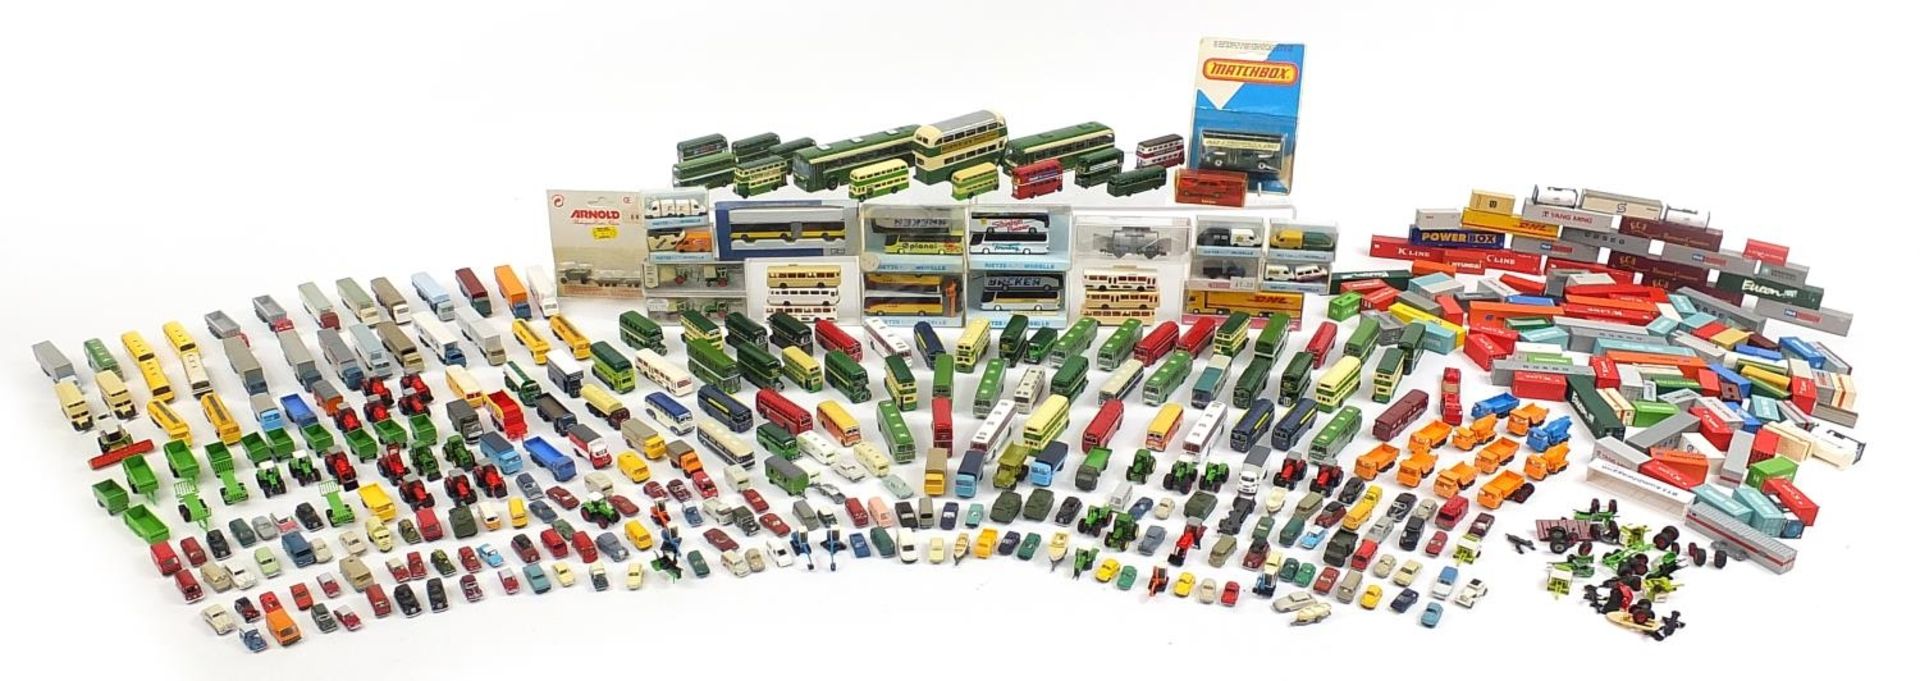 Large collection of N gauge model railway advertising vehicles, freight containers and accessories